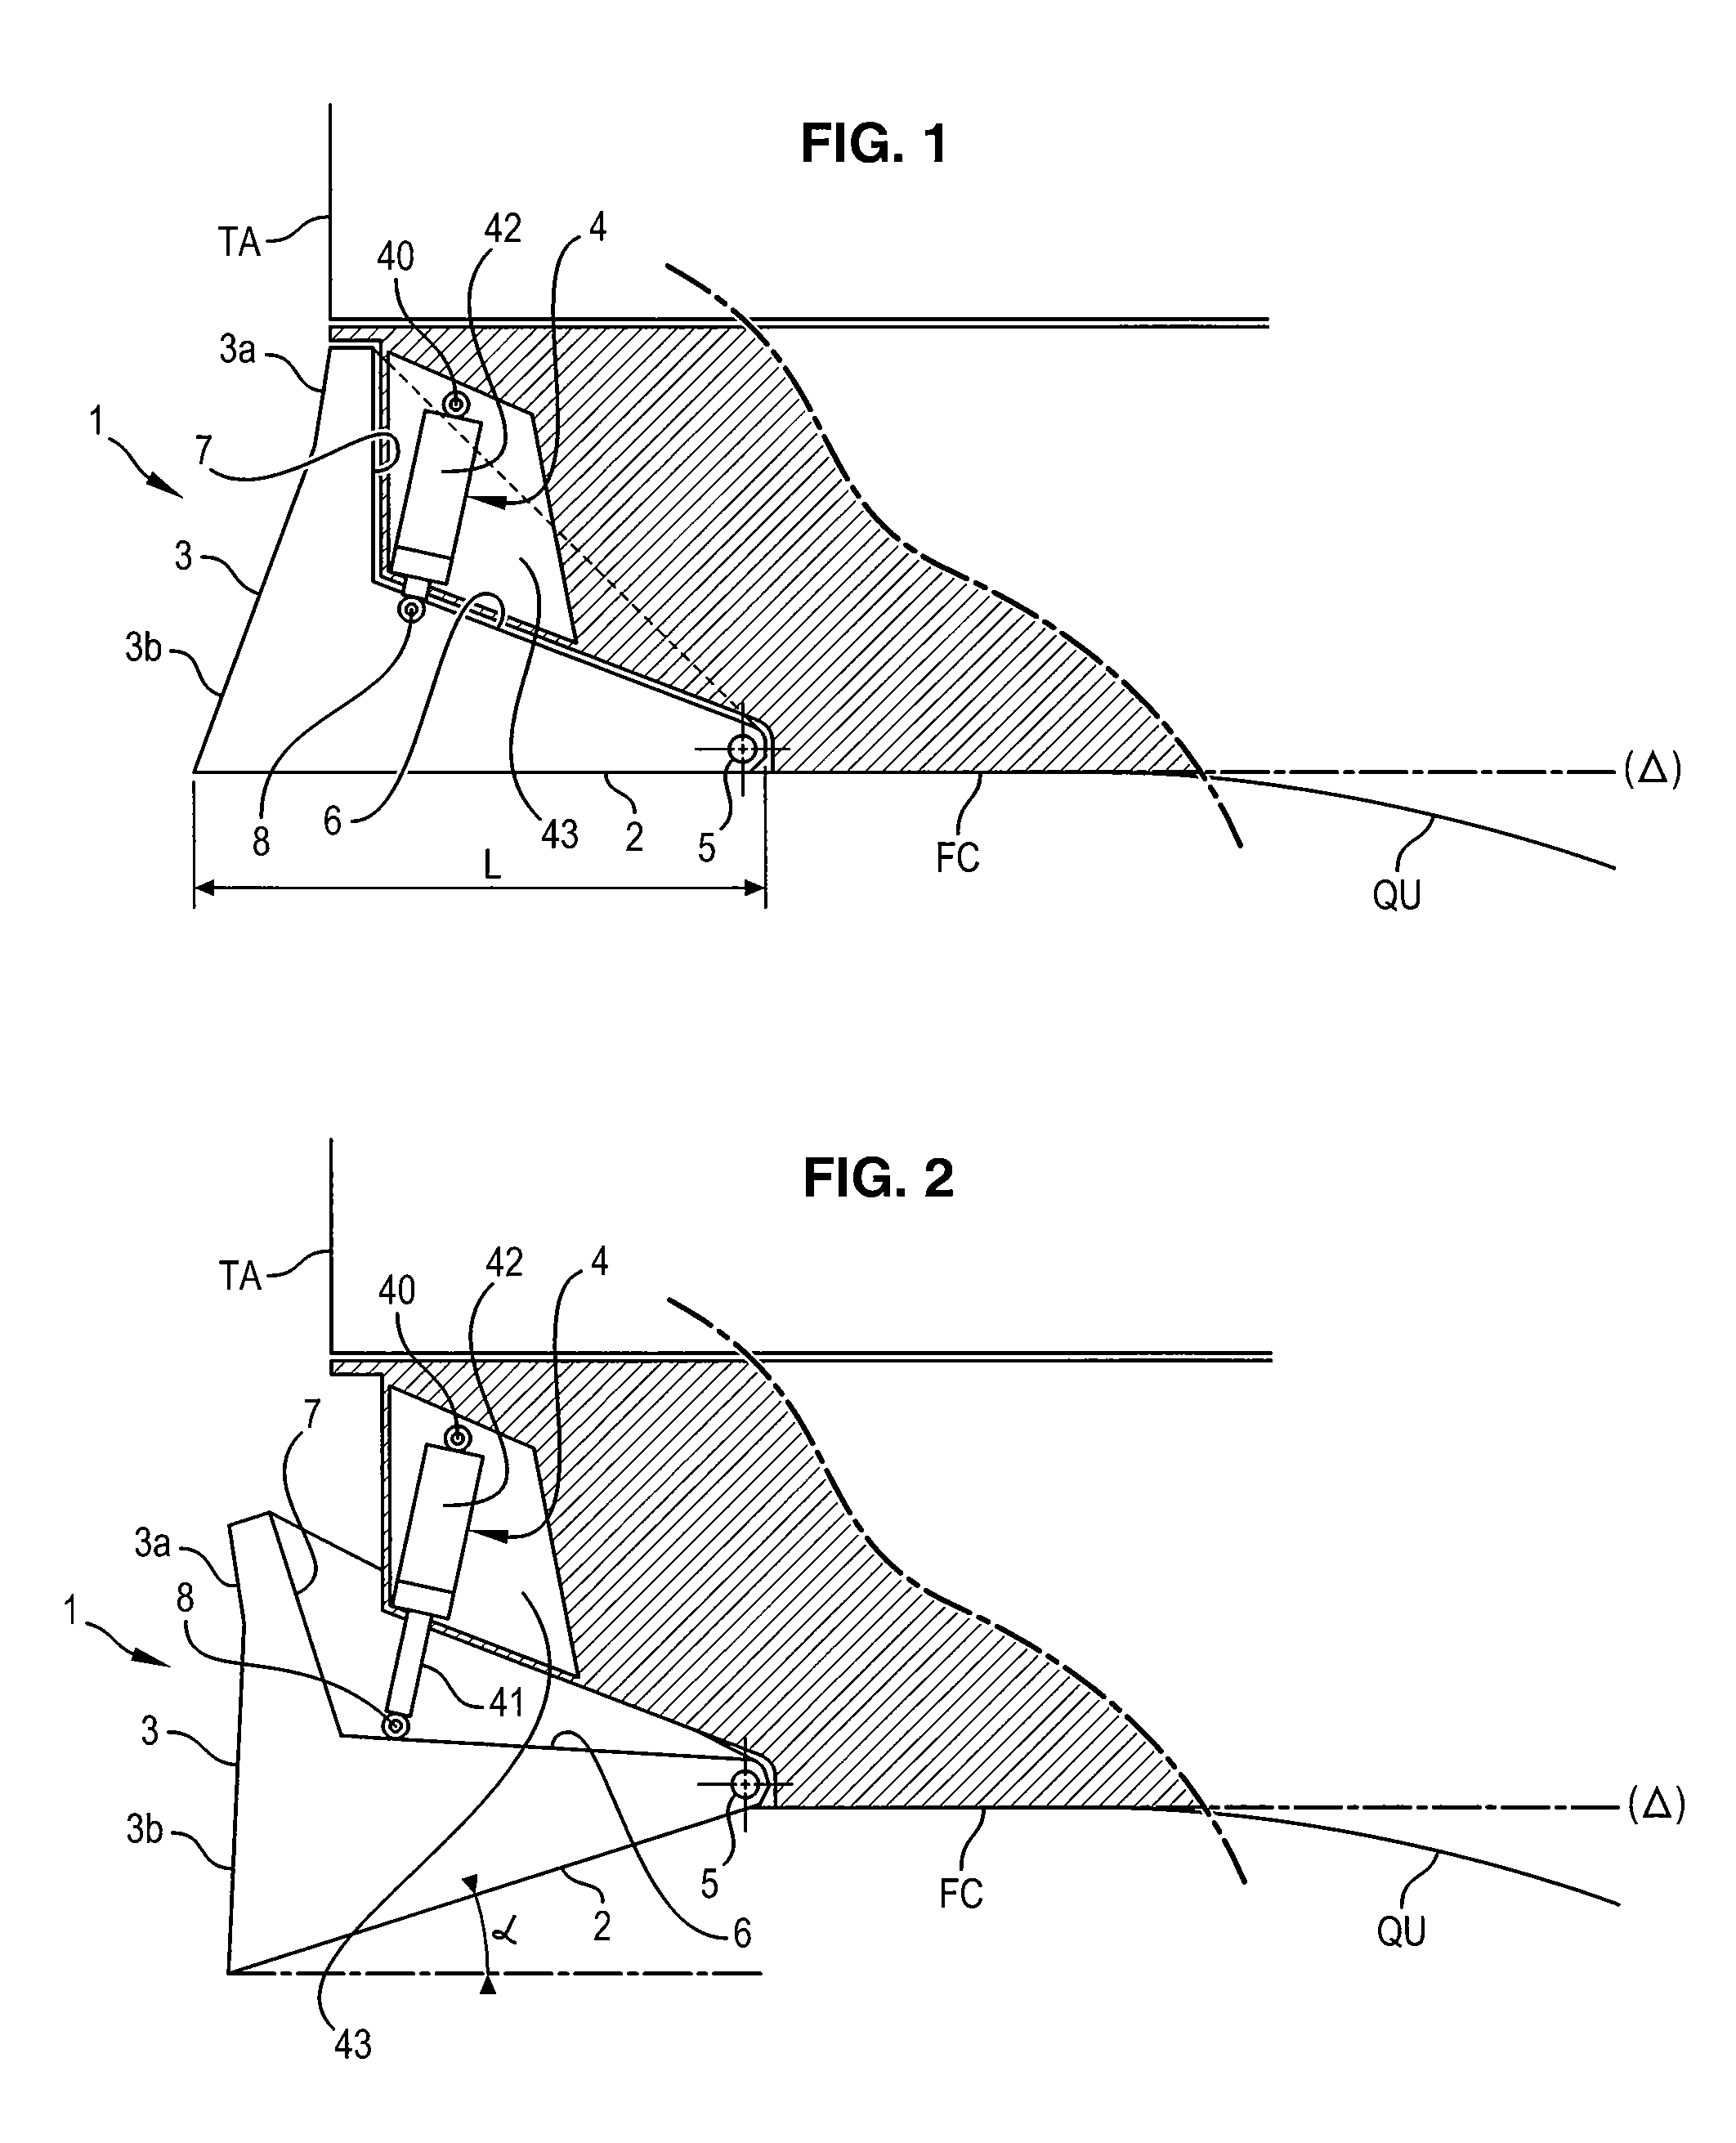 Ship with stern equipped with a device for deflecting a flow of water